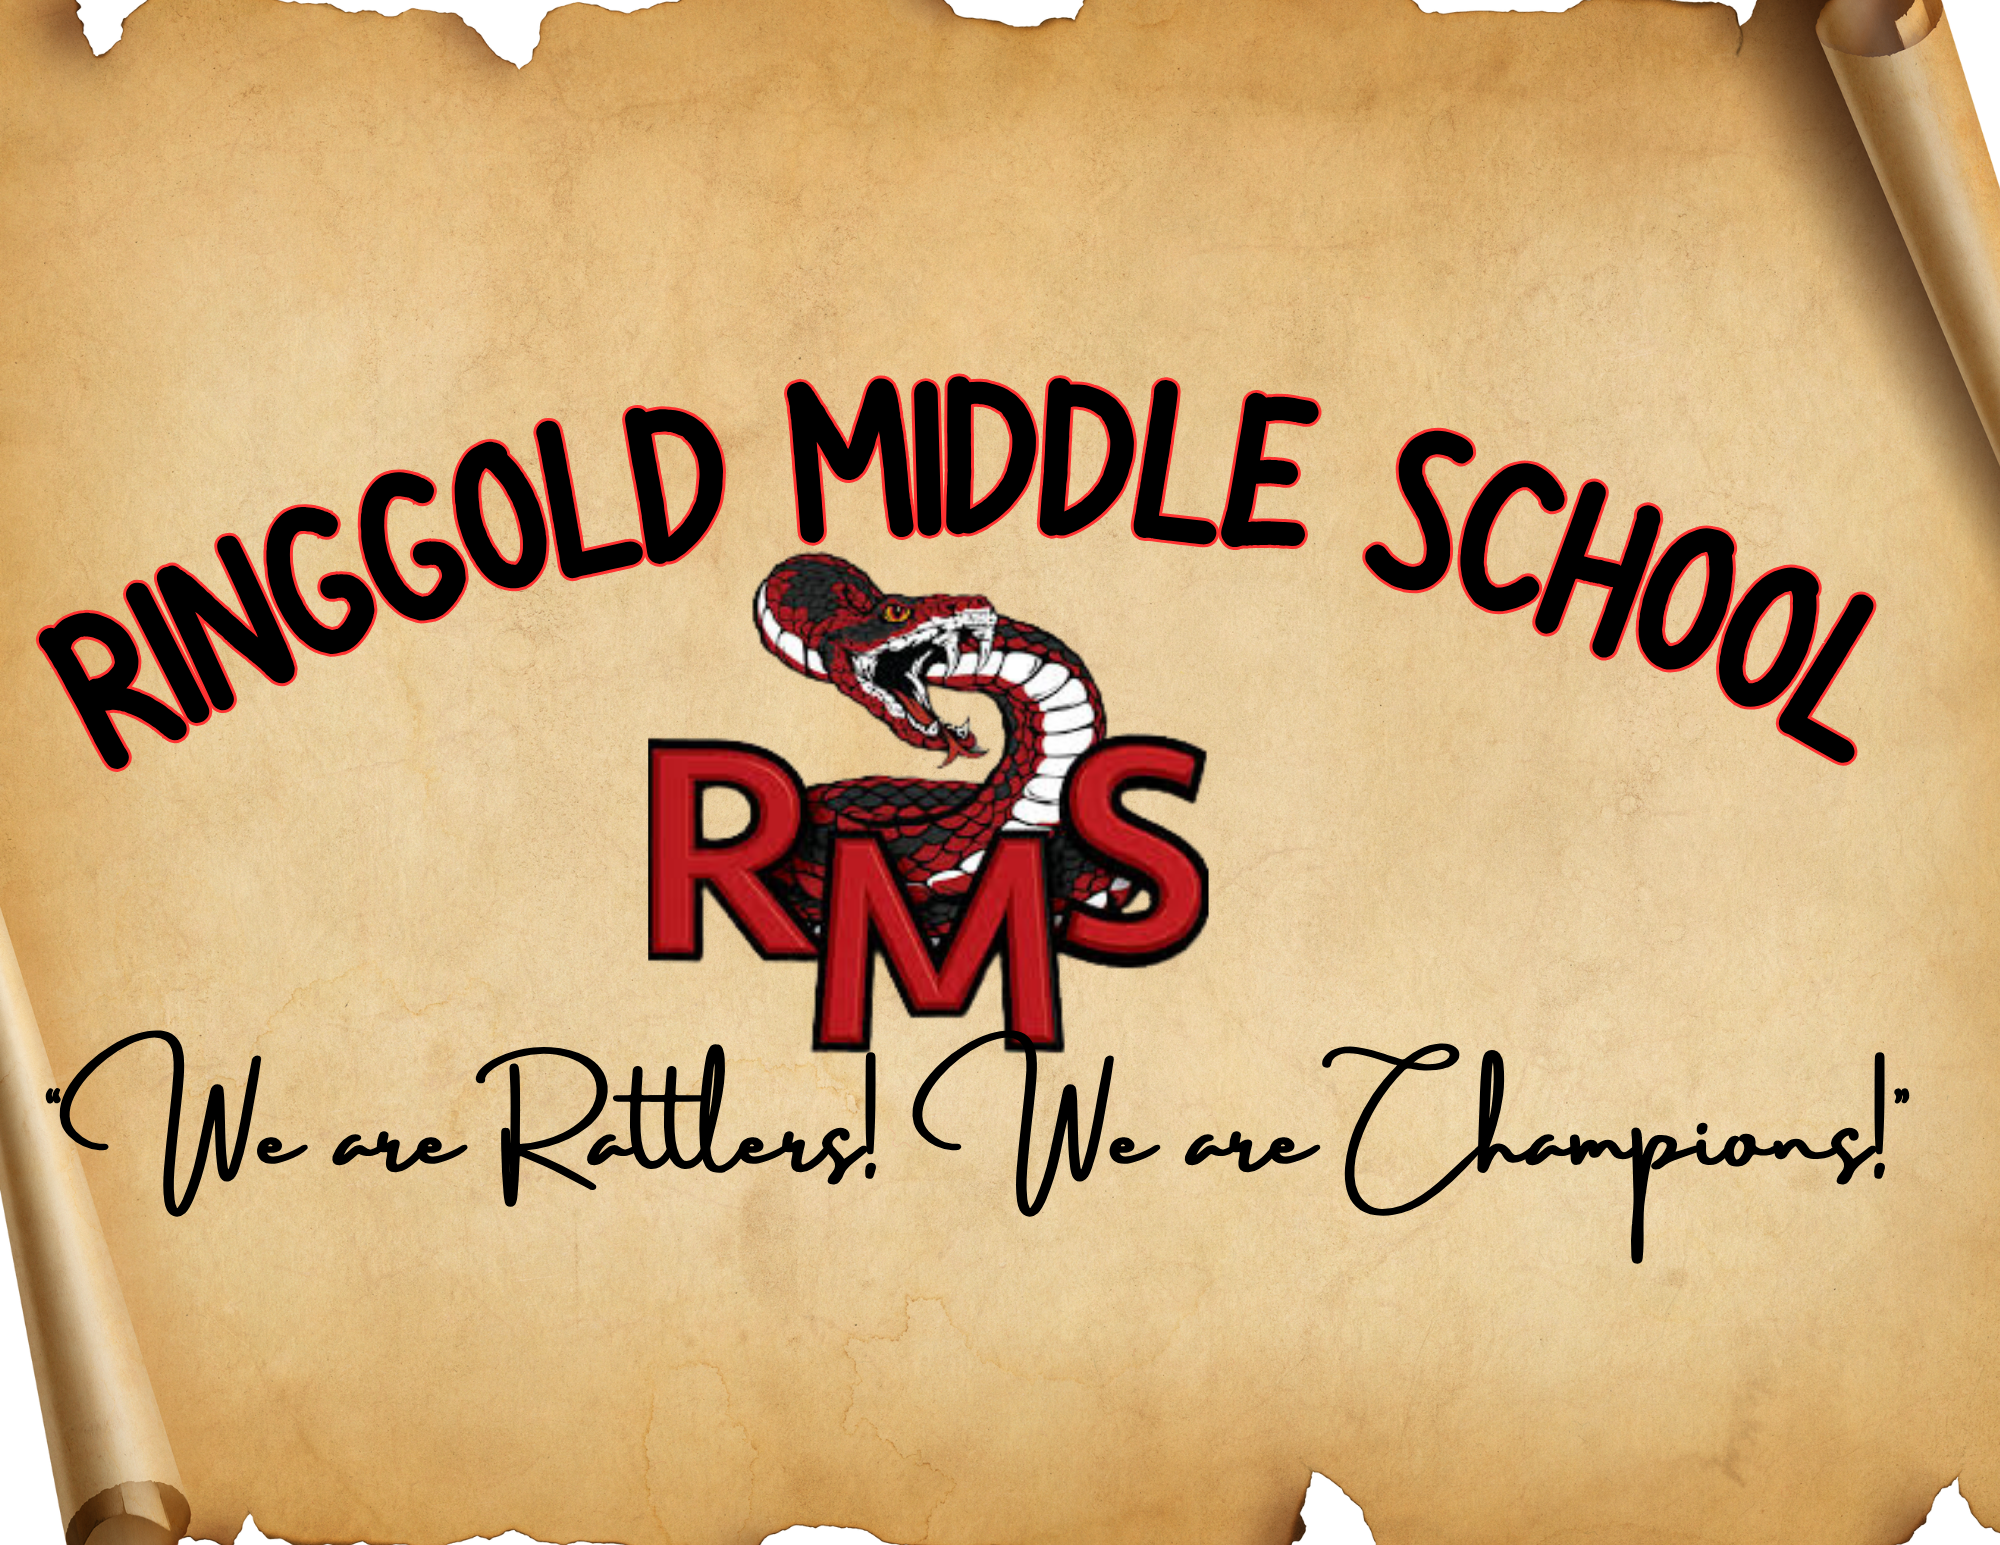 ringgold middle school we are rattlers we are champions